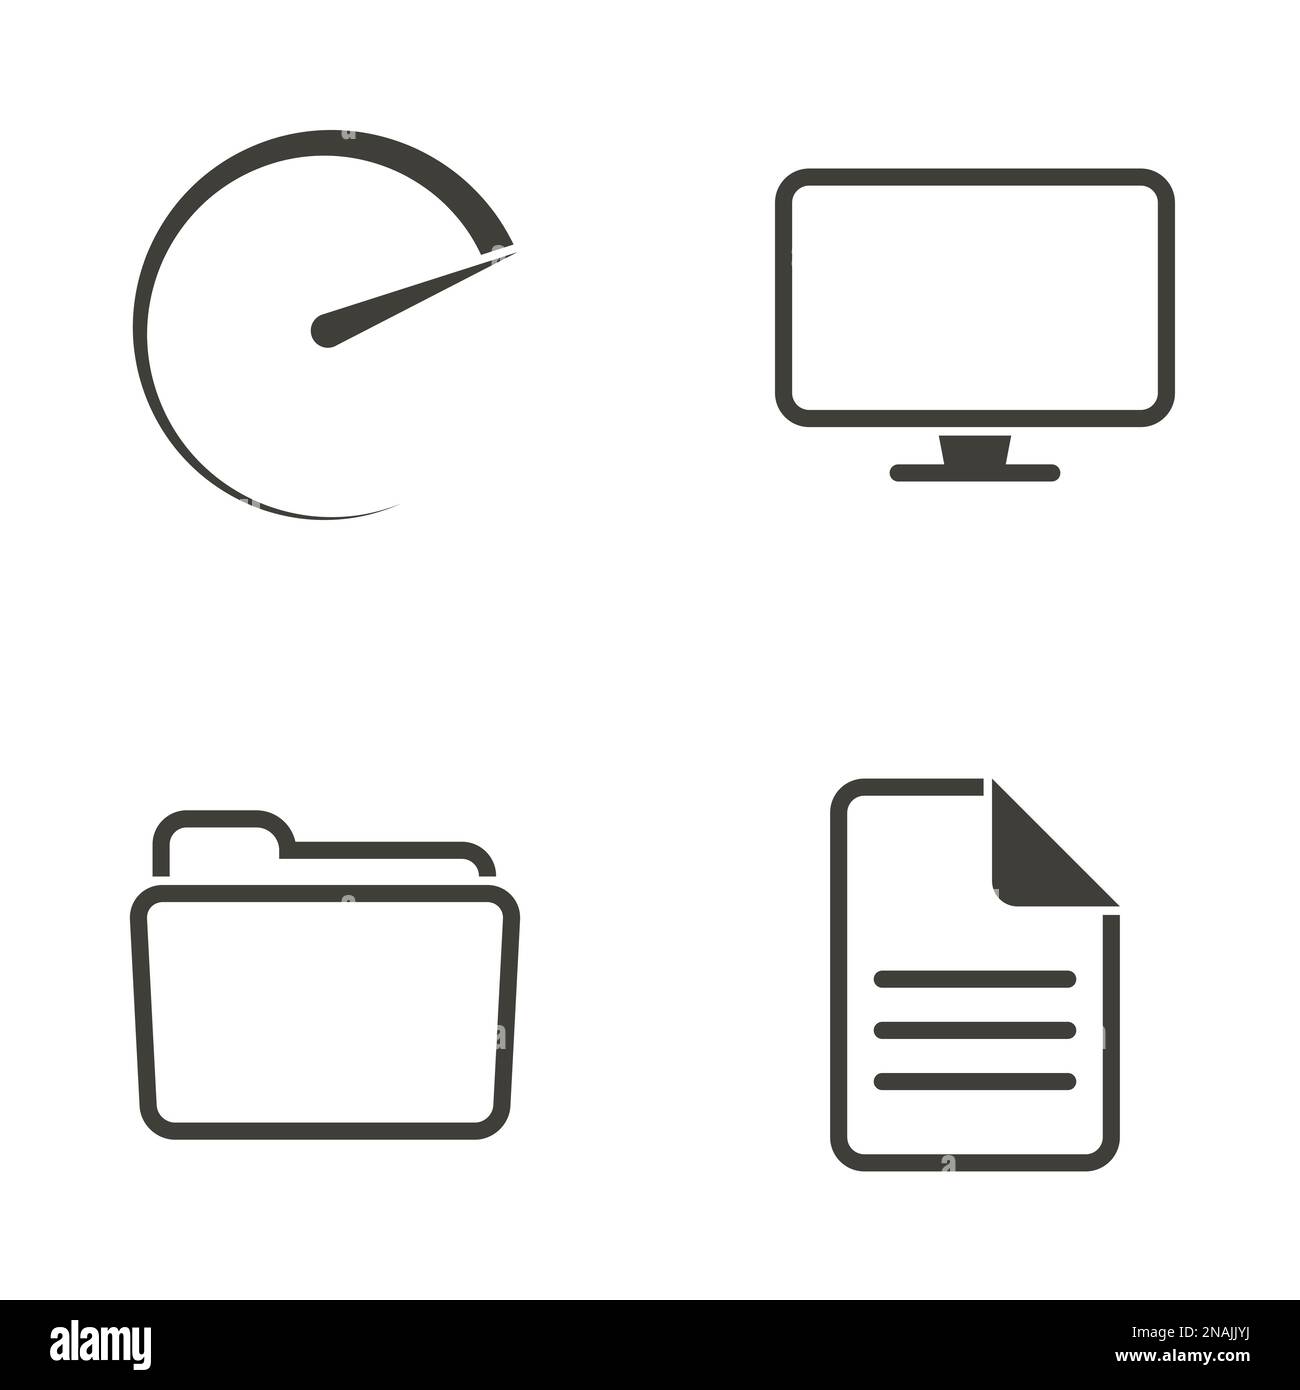 Set of objects on the theme of file, the computer Stock Vector